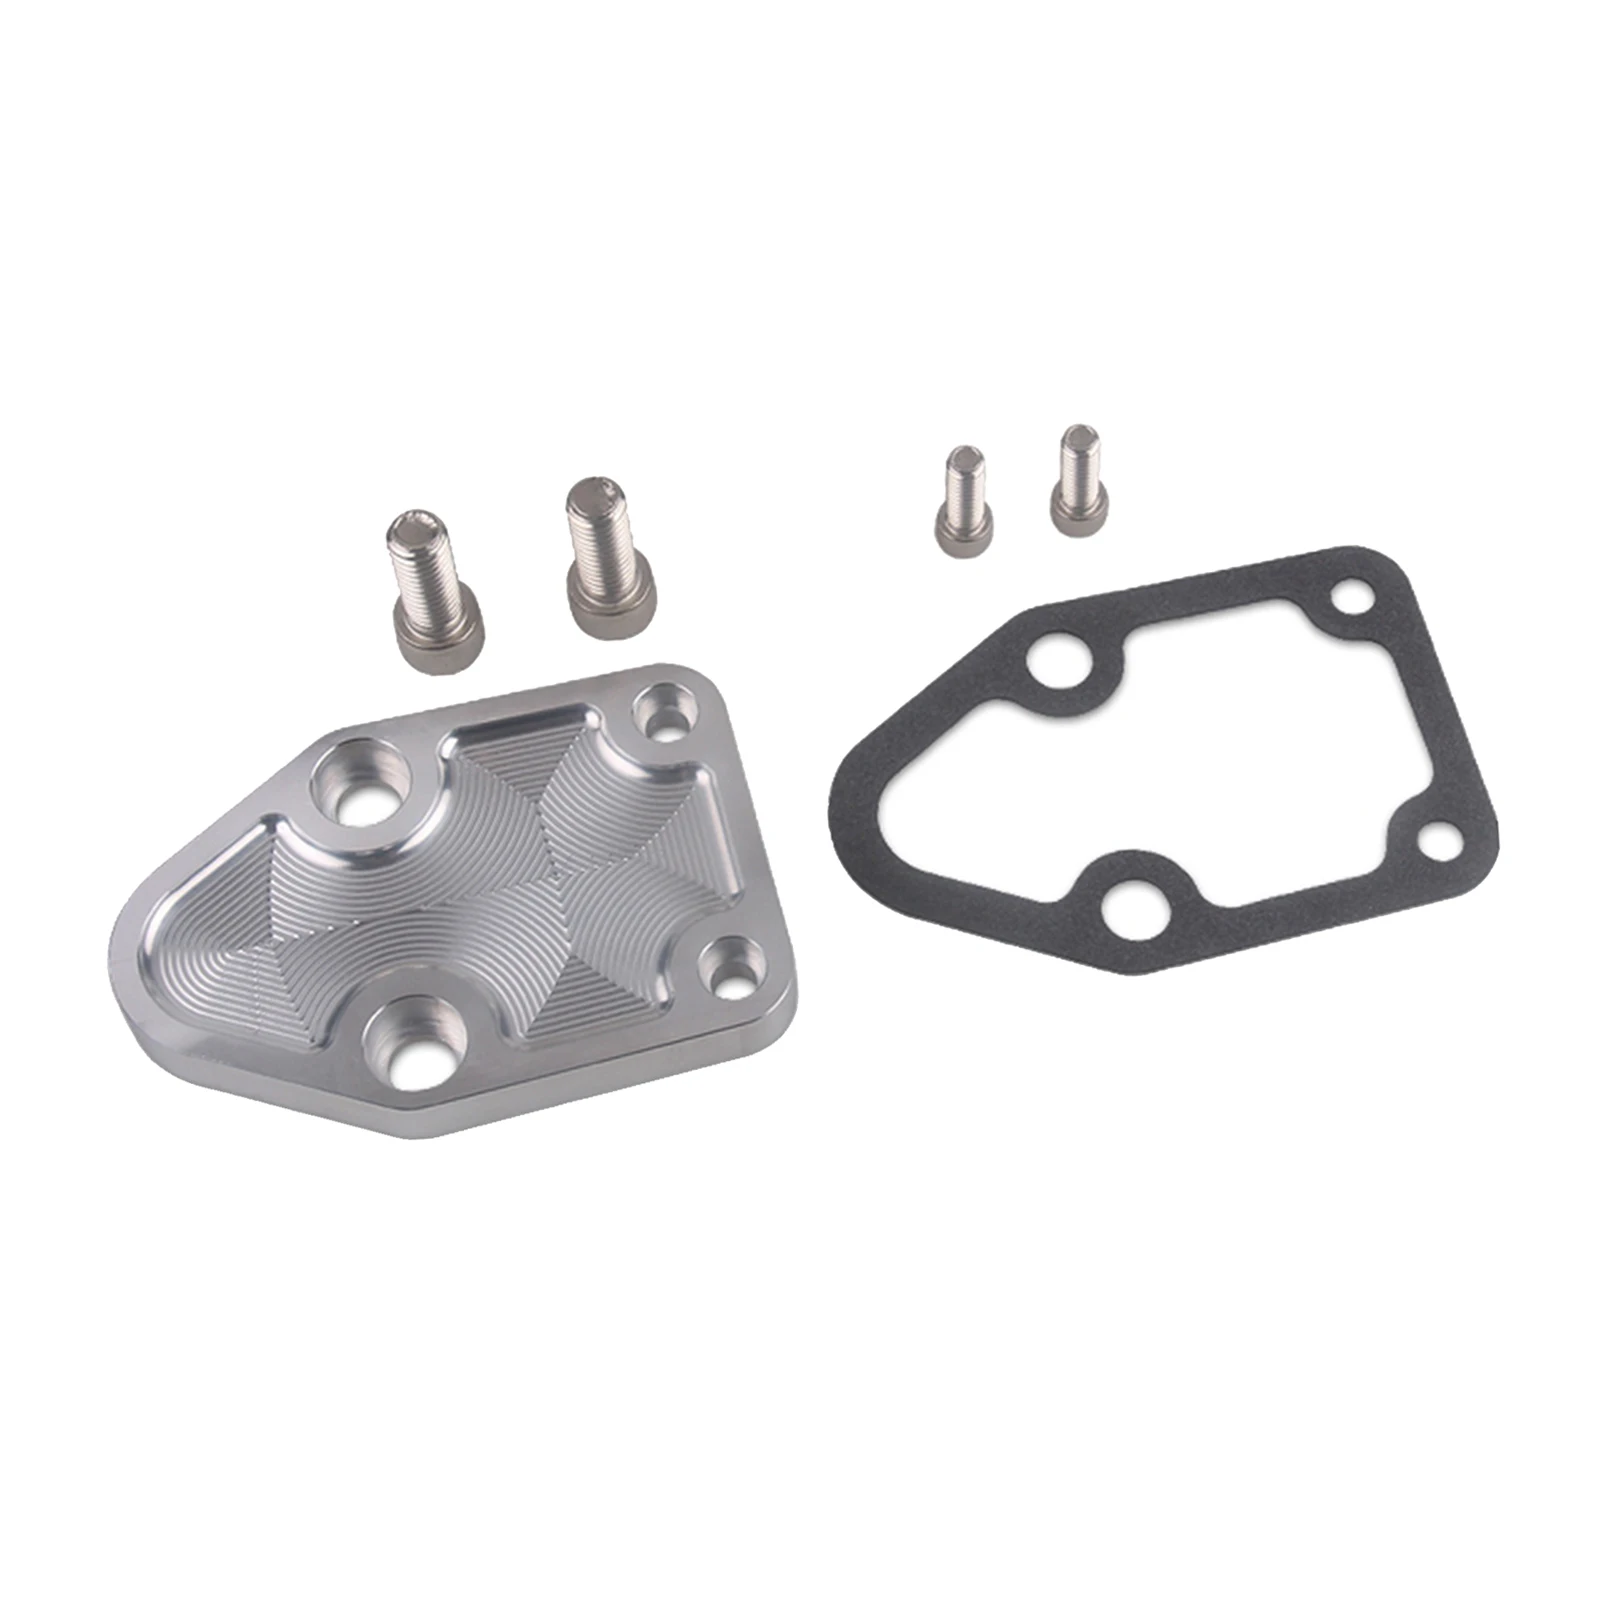 Aluminum Fuel Pump Plate Kit Replacement for CHEVY 283 305 327 350 400